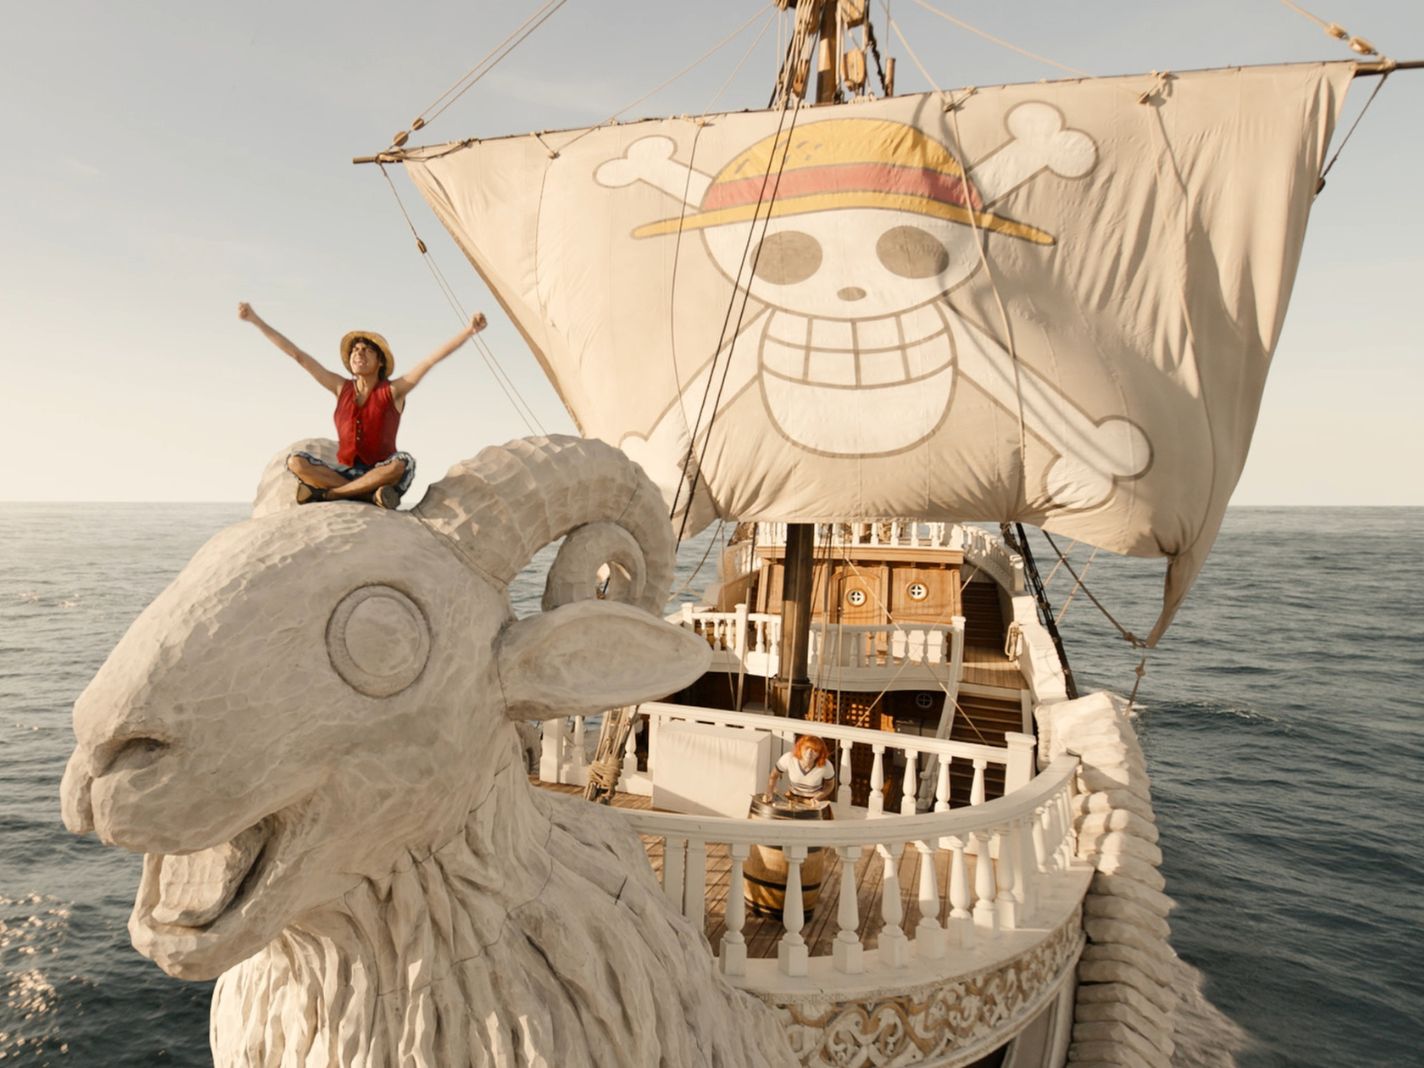 Did You Know the Netflix 'One Piece' Ships Were Actually Built